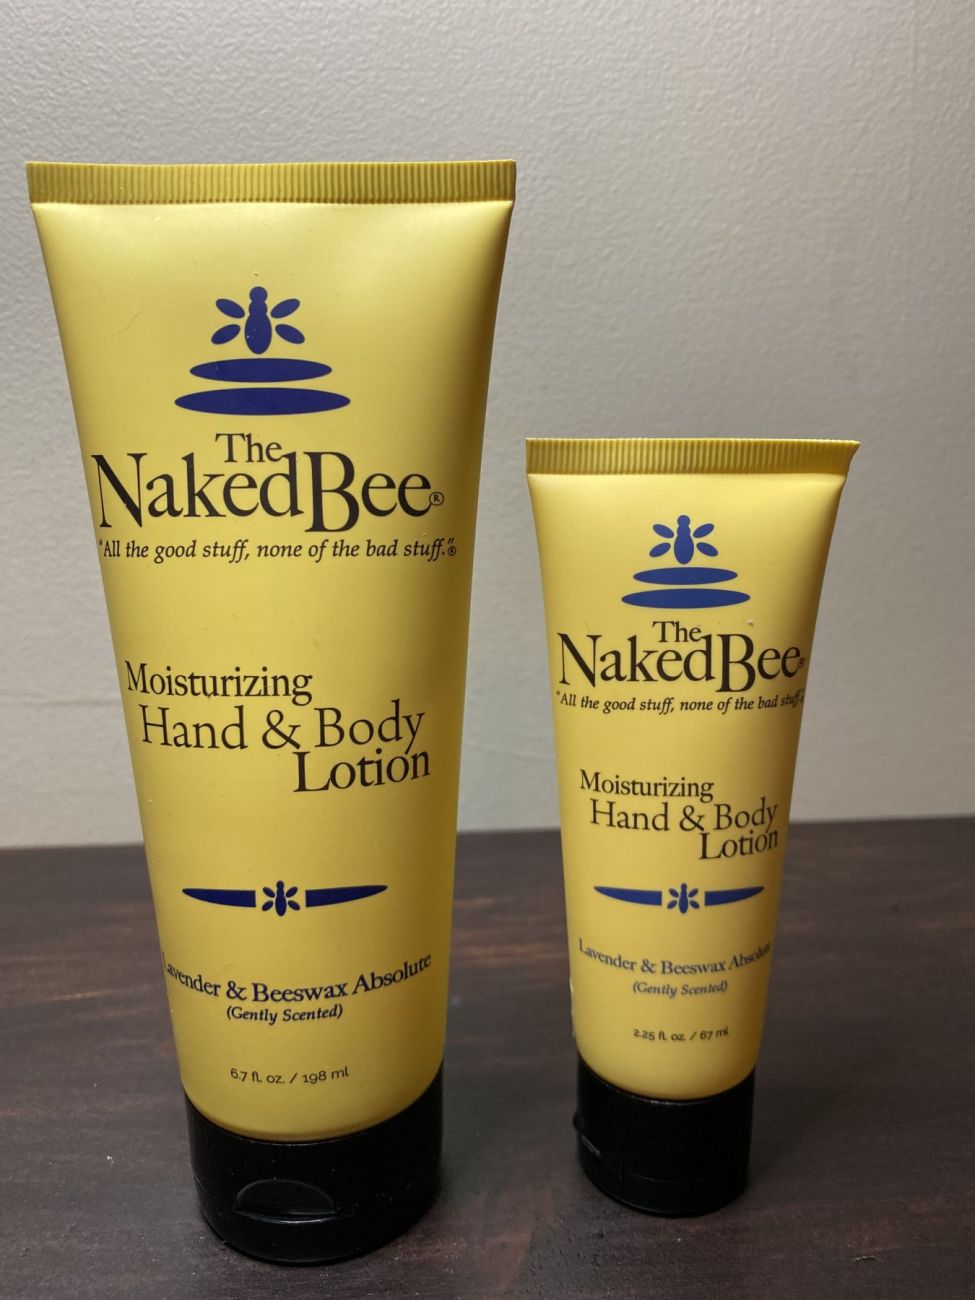 Moisturizing Hand & Body Lotion - Lavender & Beeswax Absolute, Naked Bee  Lotions